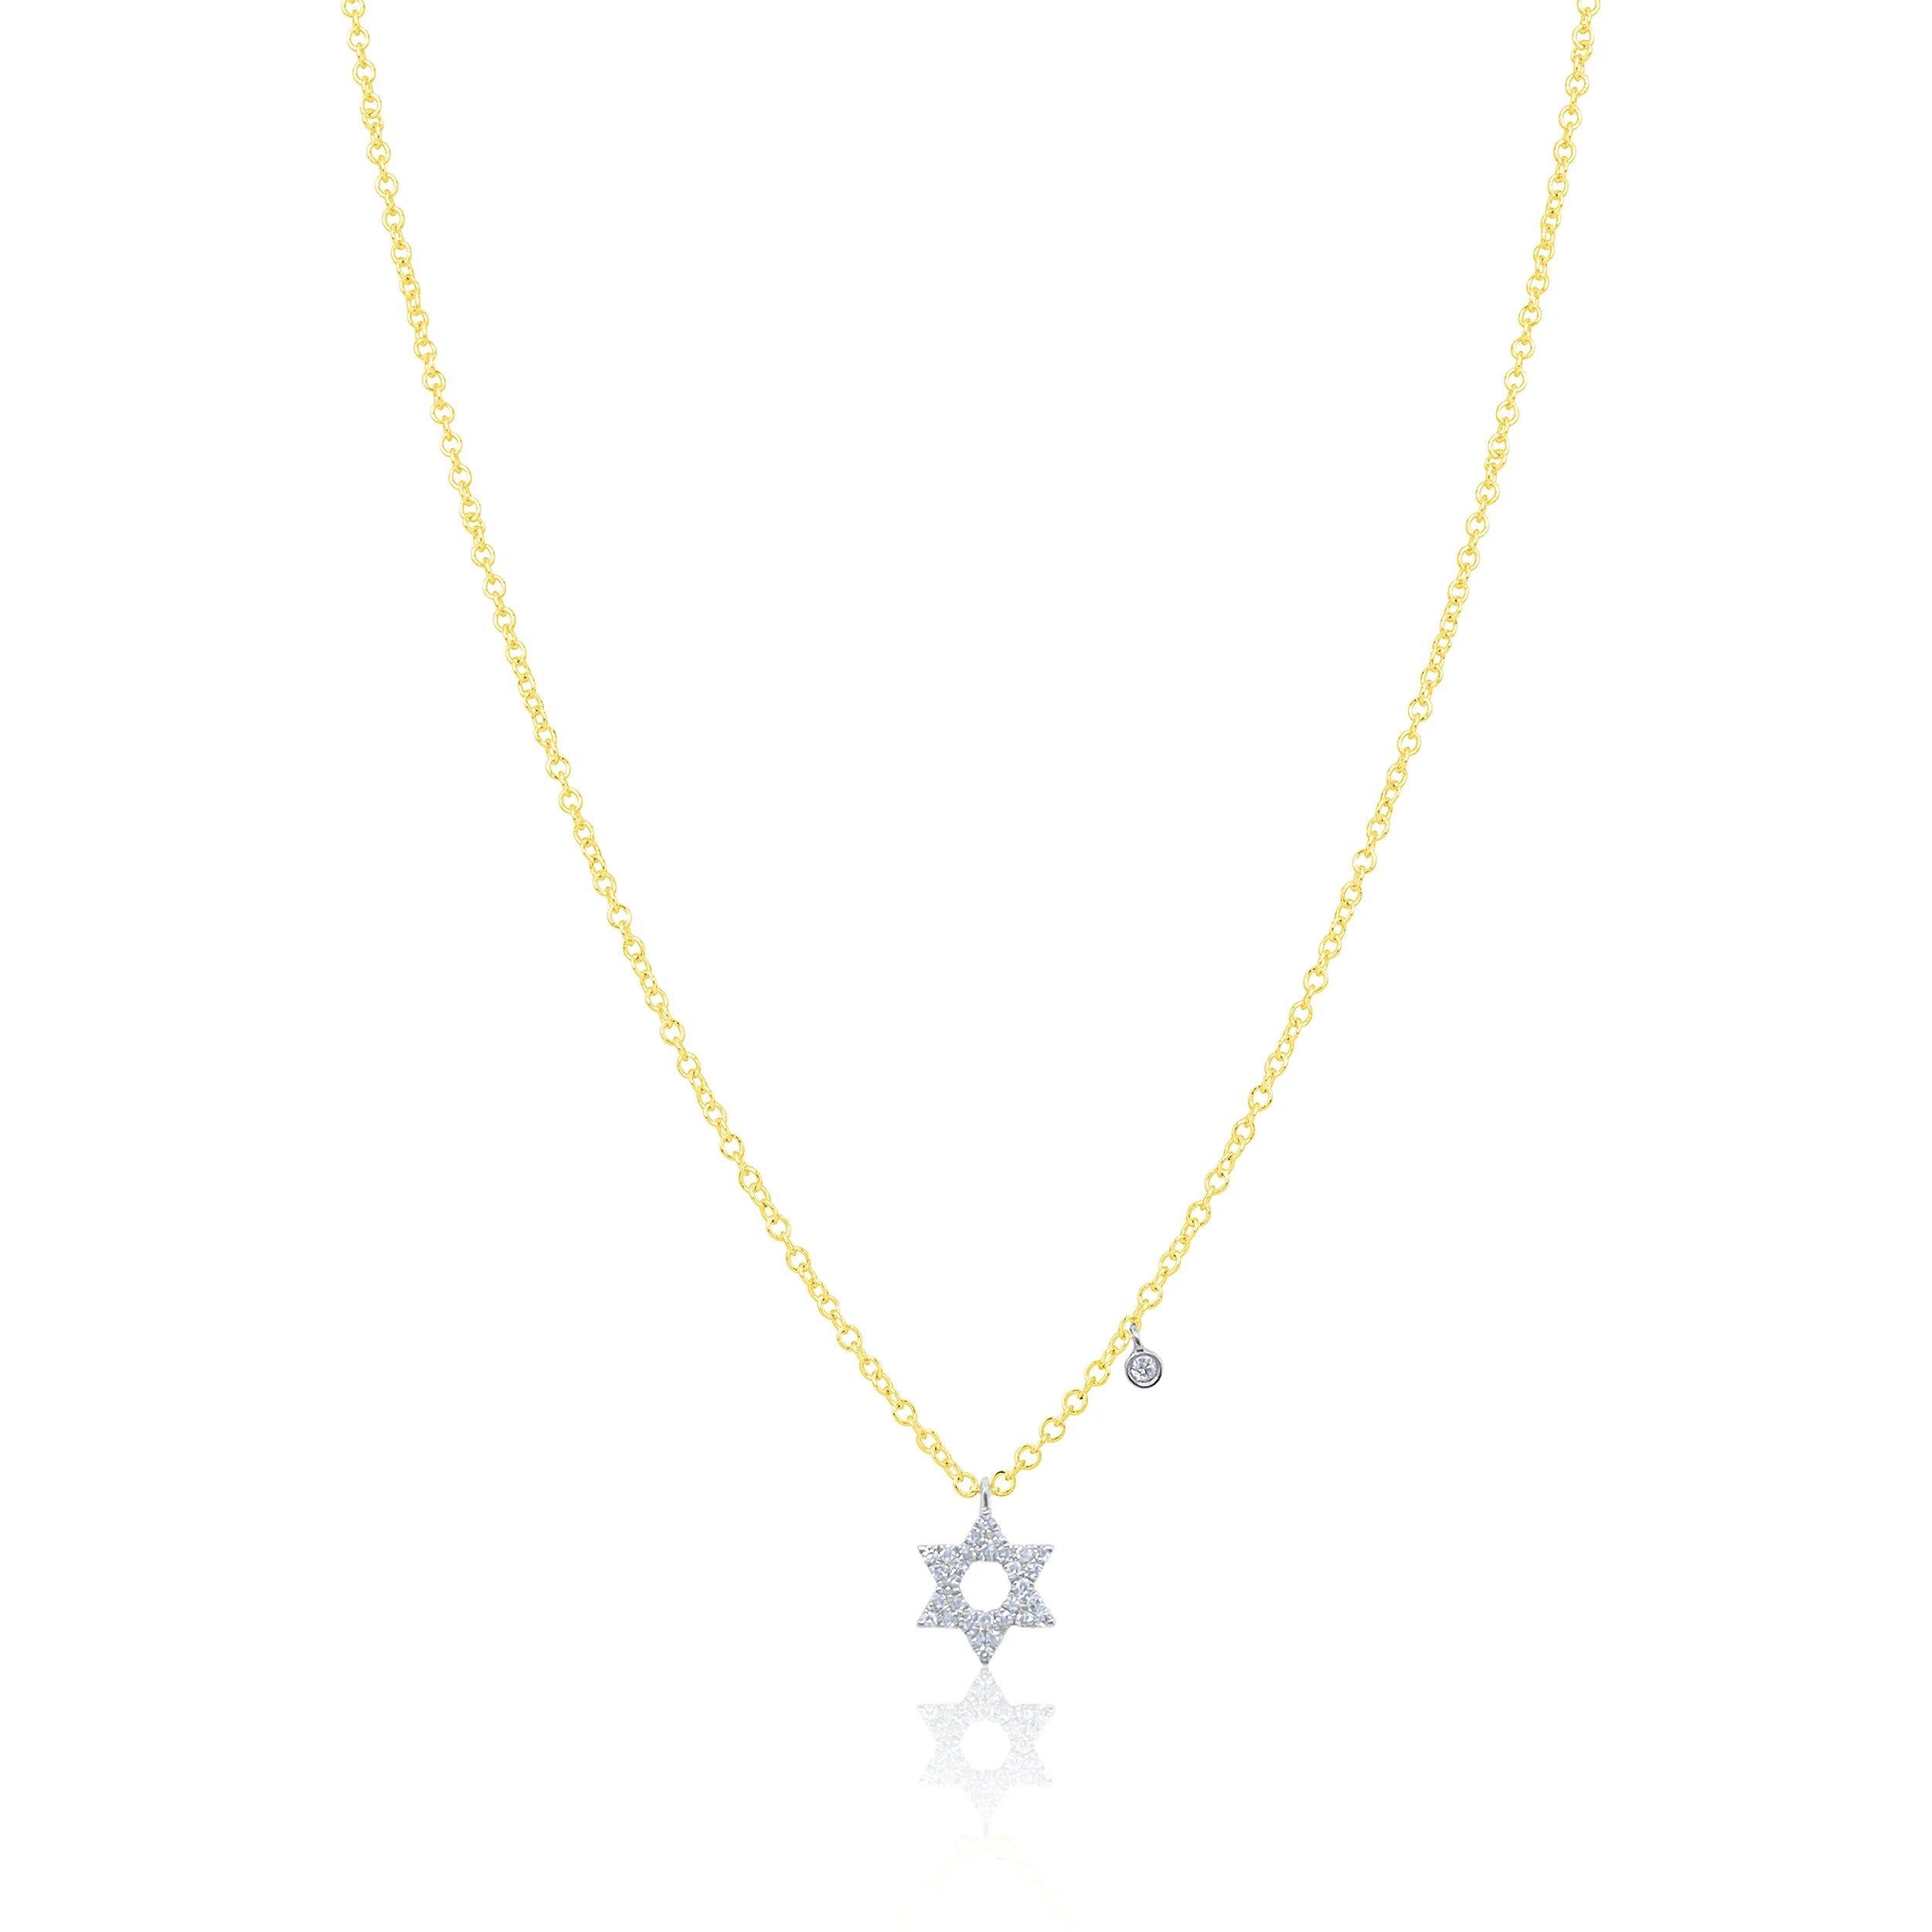 Meira T 14kt Gold 0.07 CTW Dainty Jewish Star Necklace